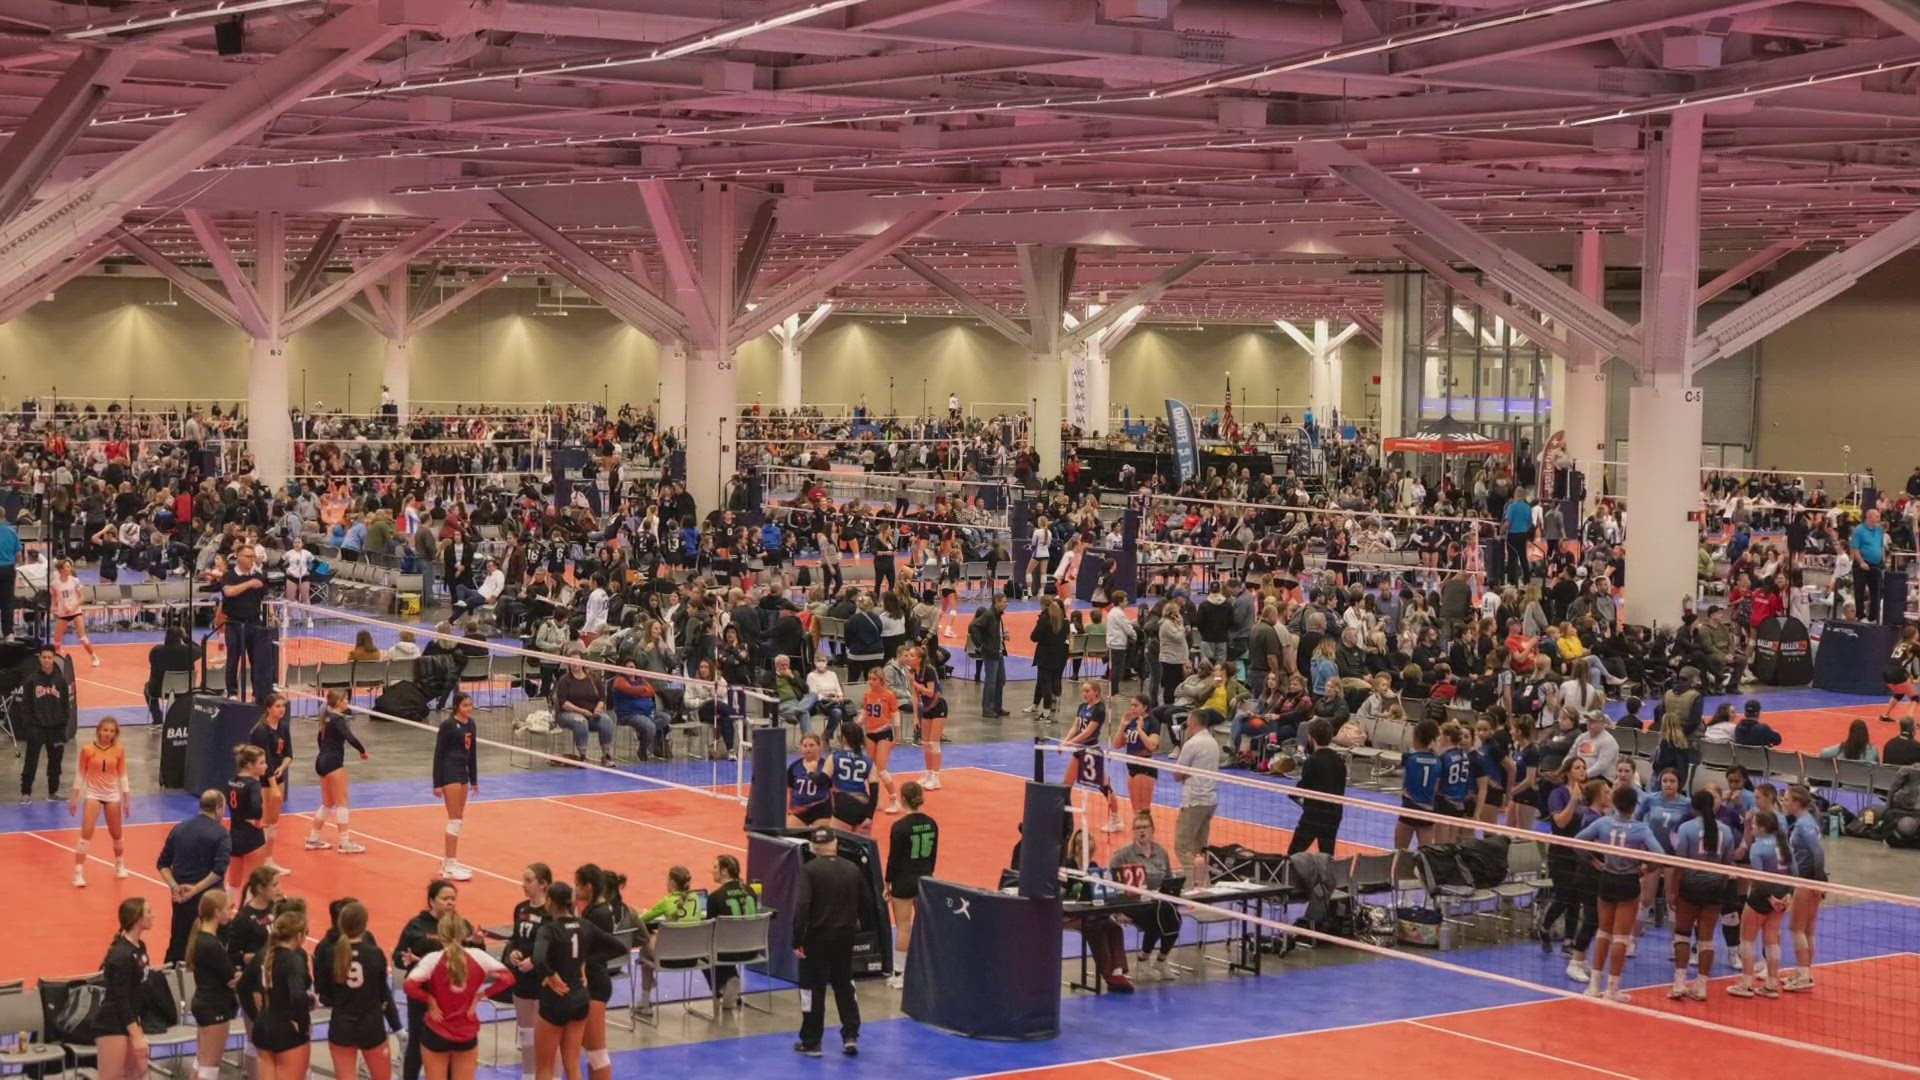 The two-weekend tournament is taking place Jan. 6-7 and Jan. 13-14 at the Huntington Convention Center of Cleveland.